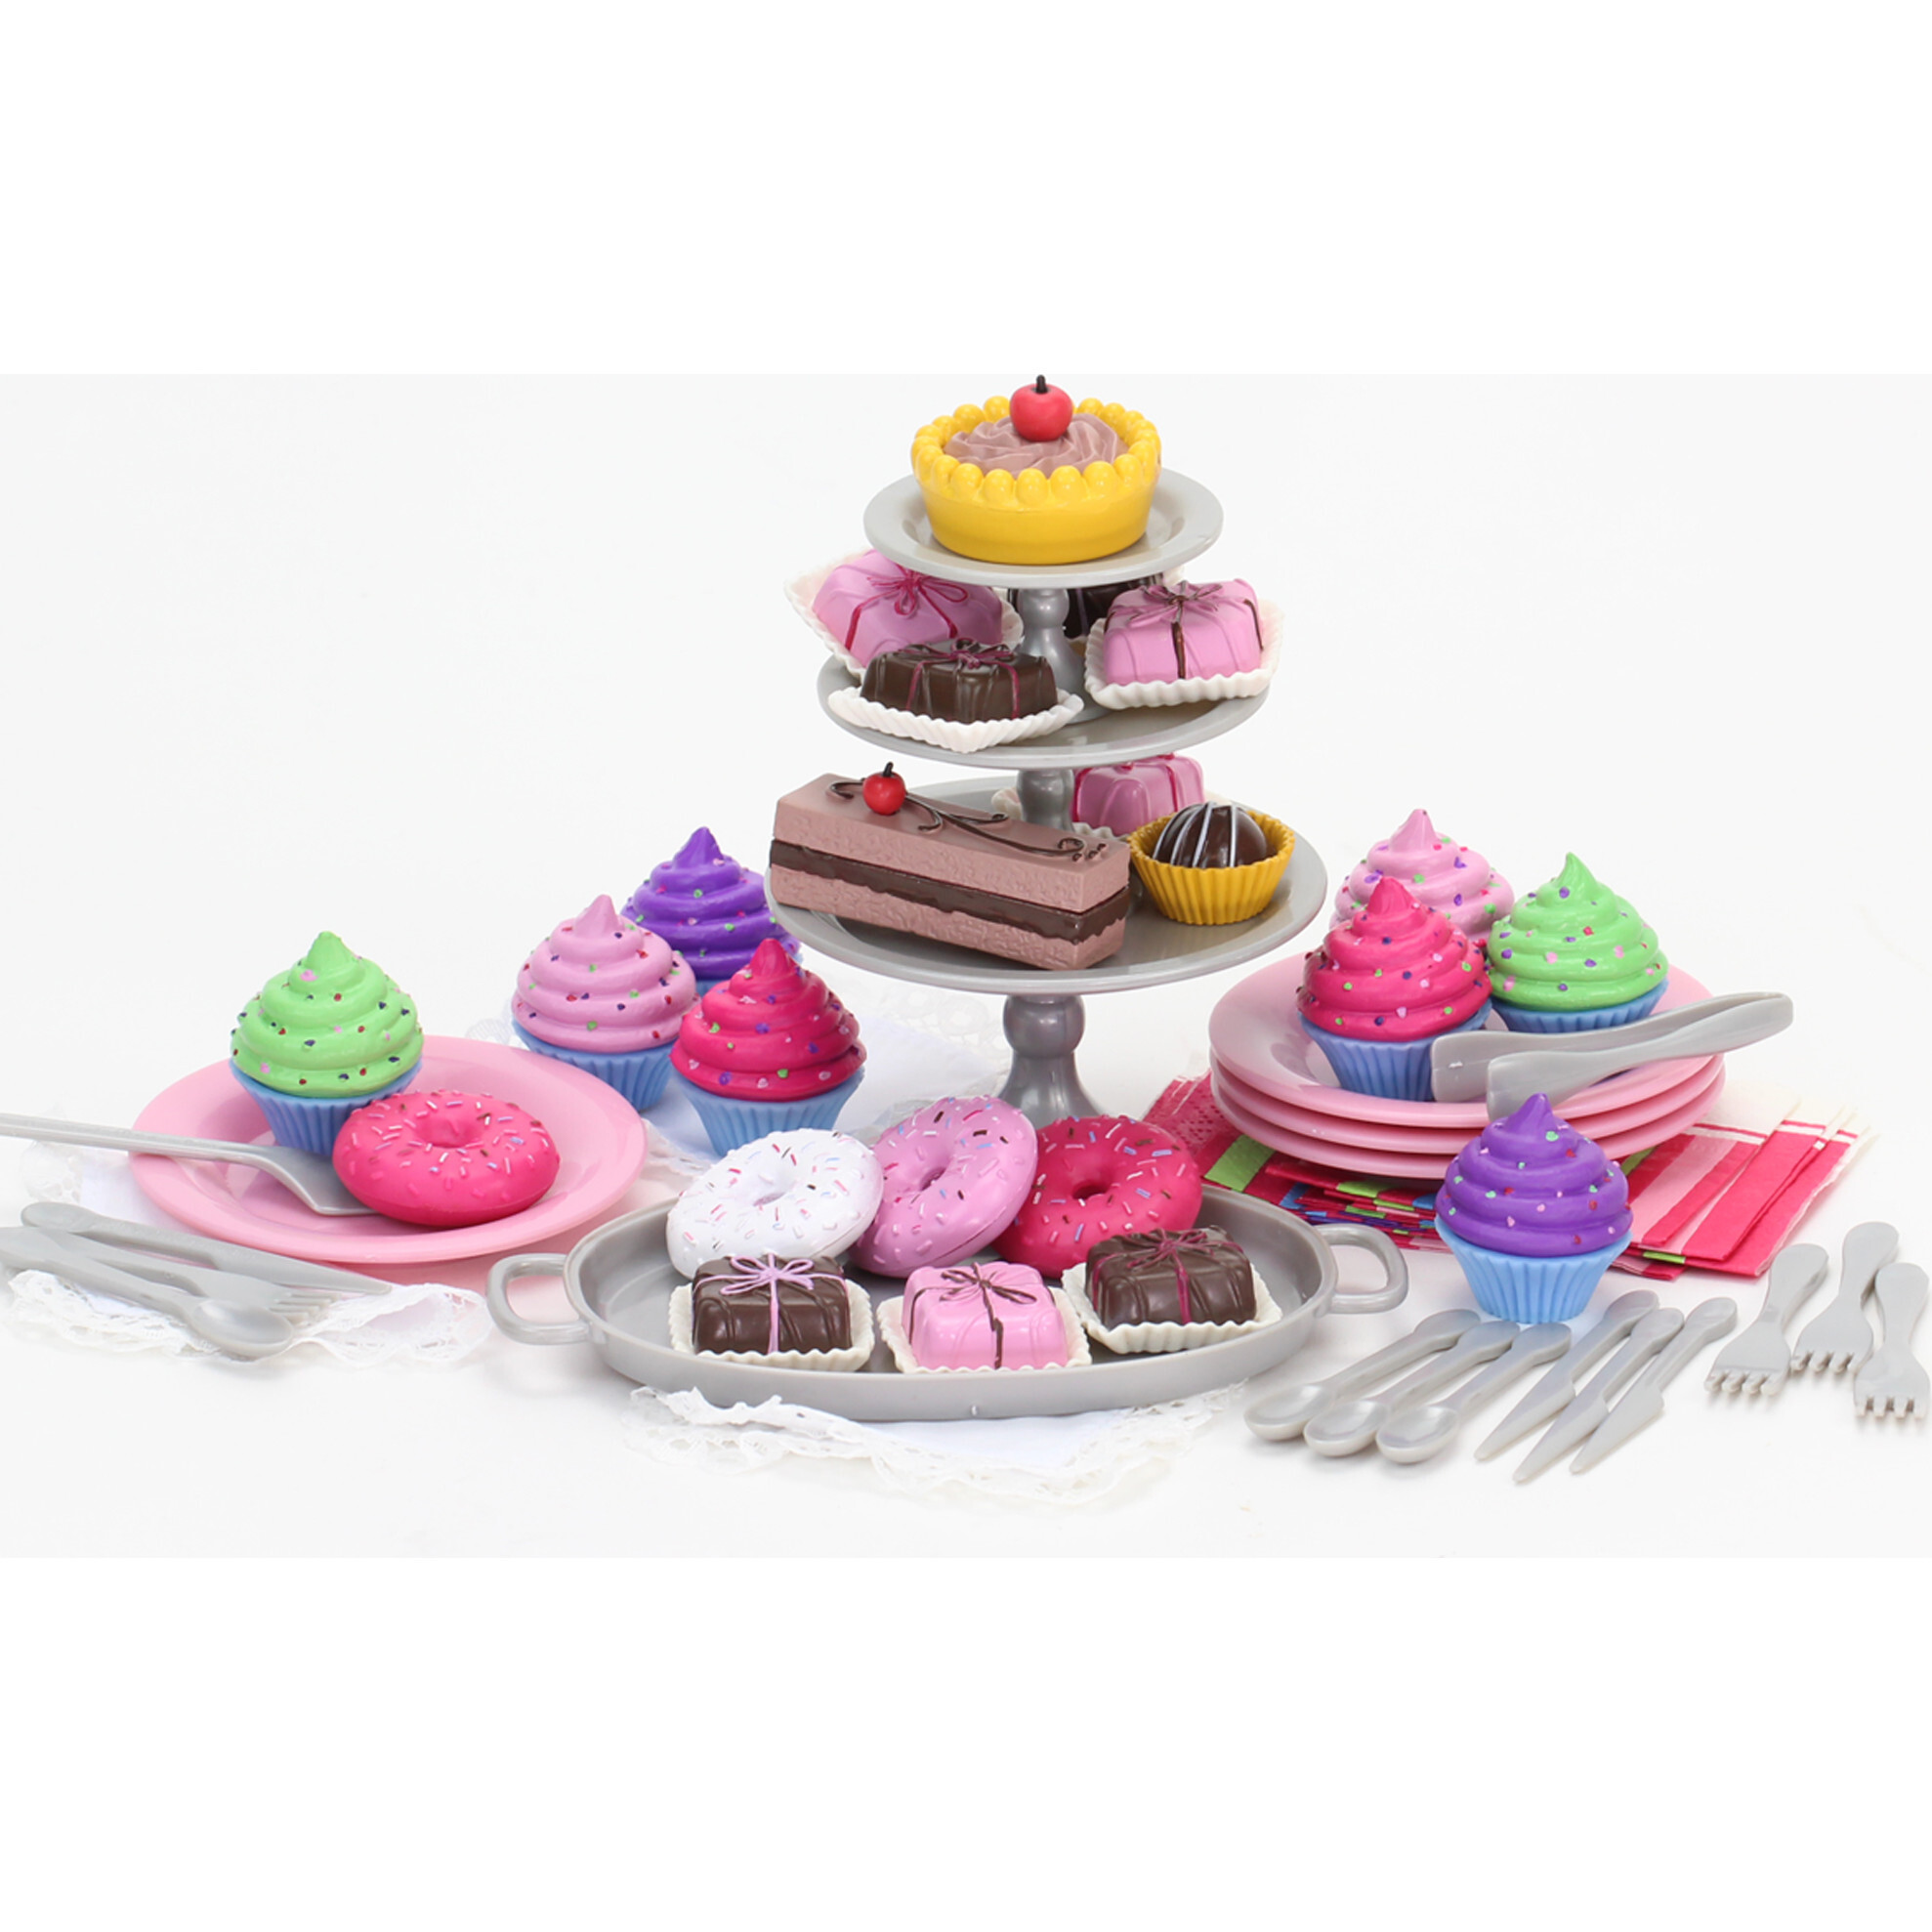 Cupcake & Petits Fours Set Pretend Play for 18" American and other Girl Dolls 